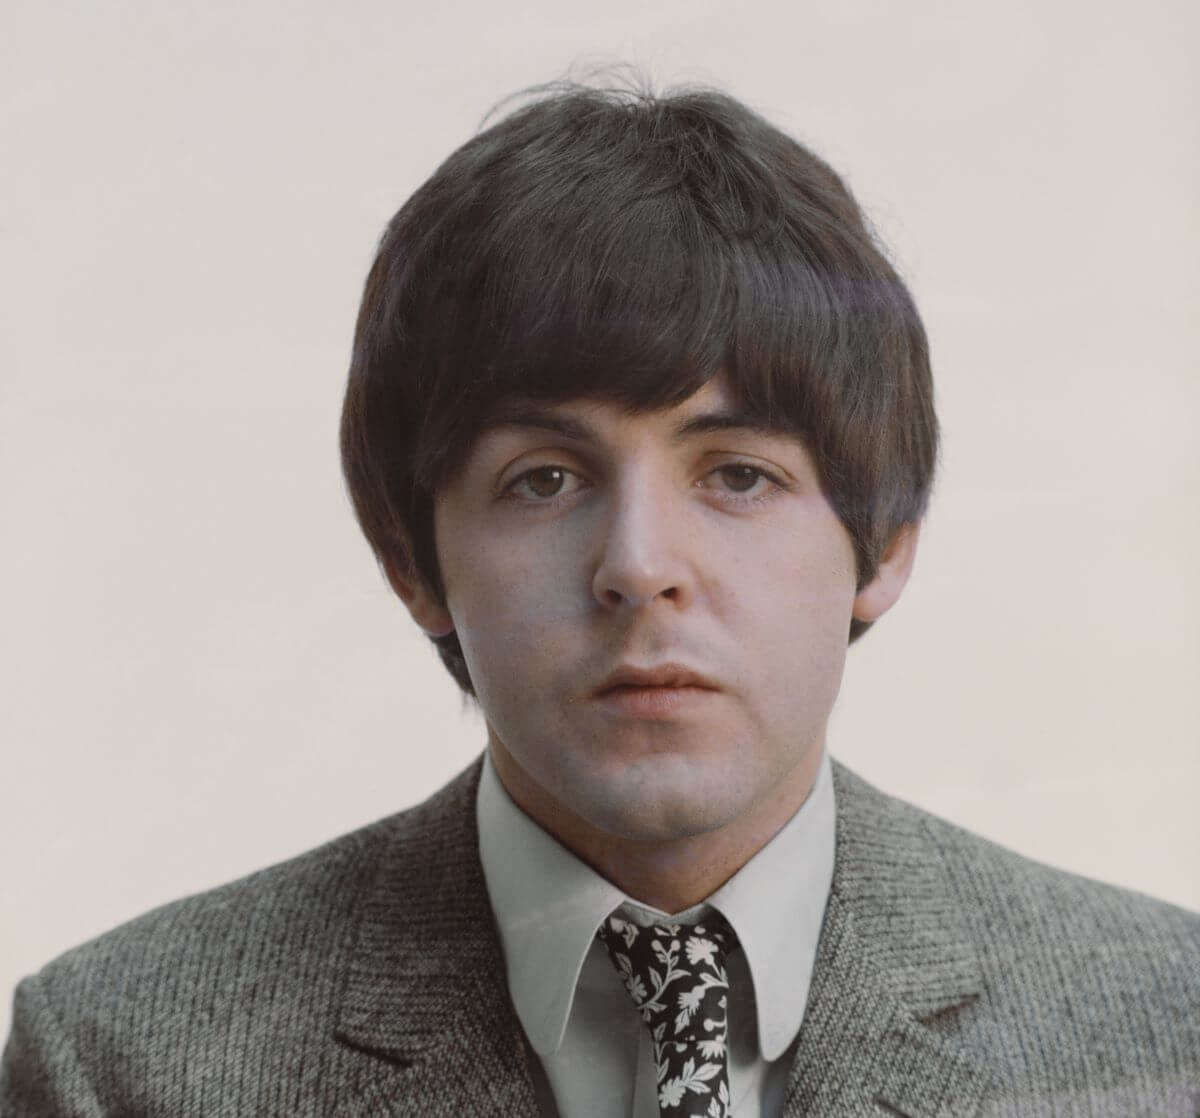 The Beatles' Paul McCartney wears a suit and tie and poses in front of a beige background.